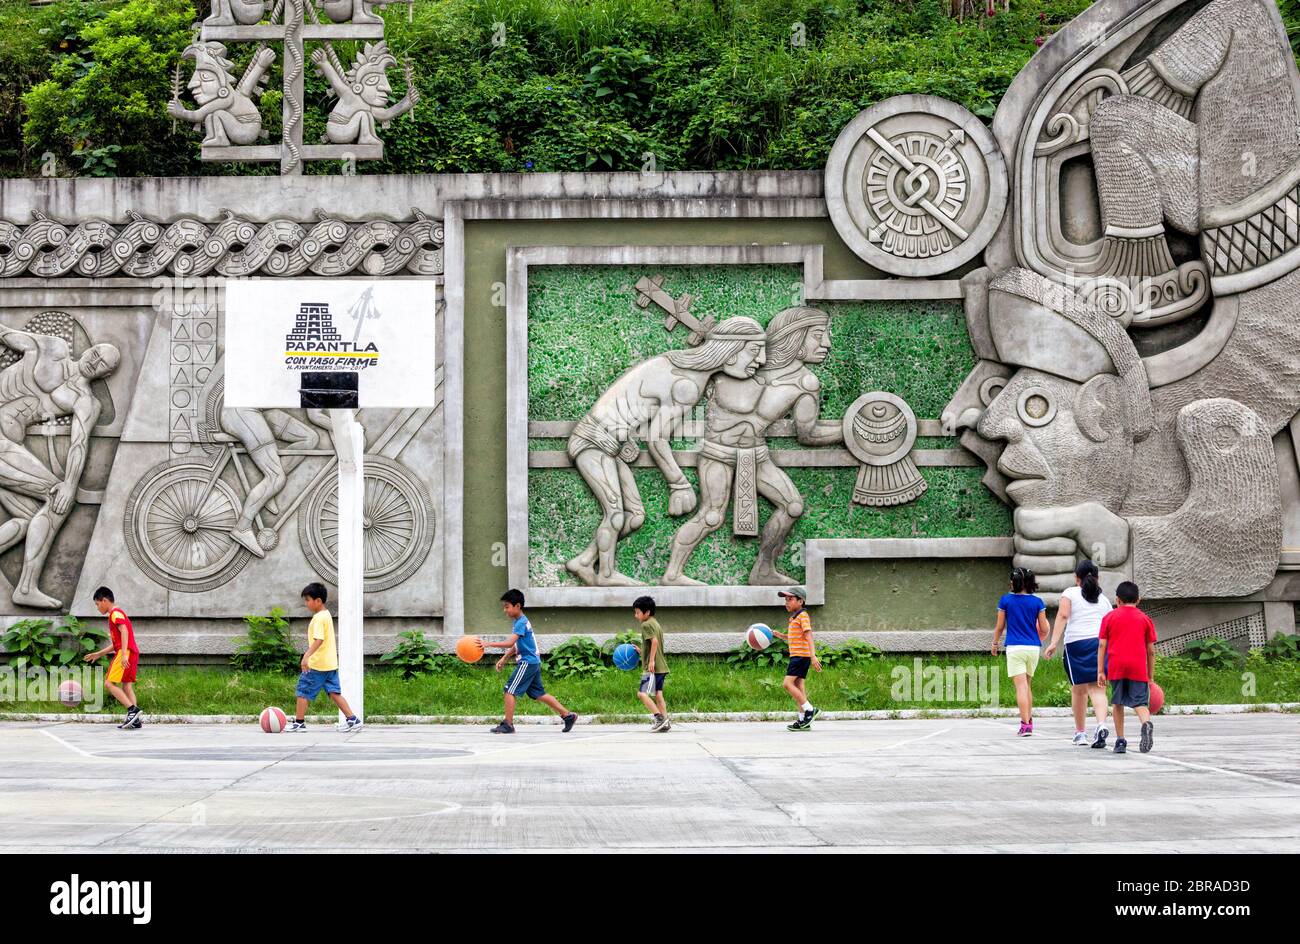 Children practice basketball surrounded by reminders of their heritage in Papantla, Veracruz, Mexico. Stock Photo